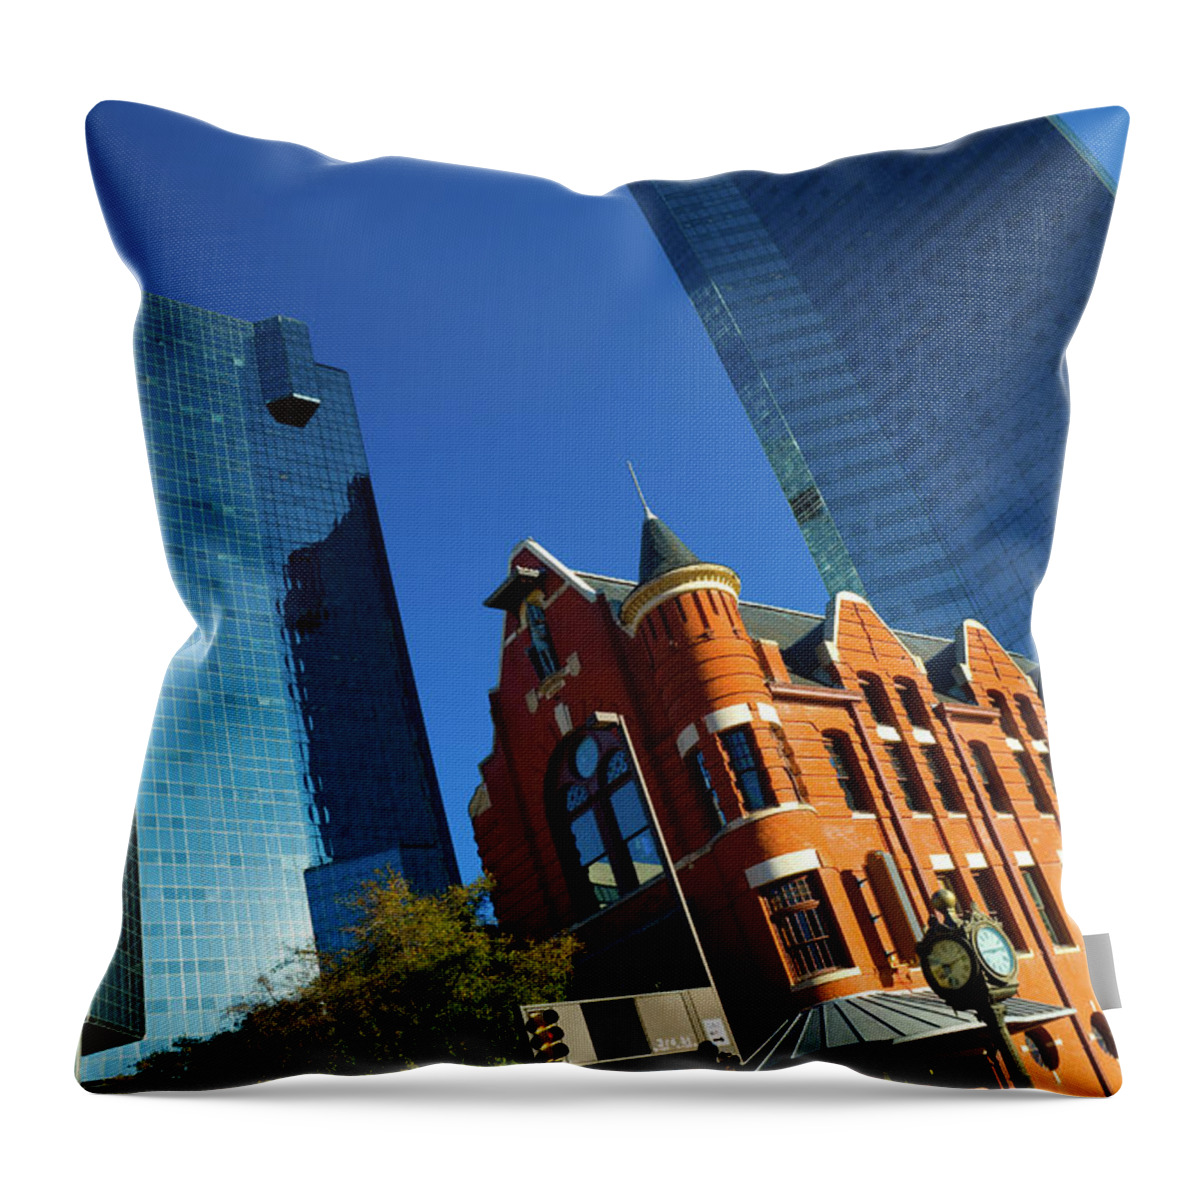 Downtown District Throw Pillow featuring the photograph Old Vs New Fort Worth Glass Buildings by Davel5957